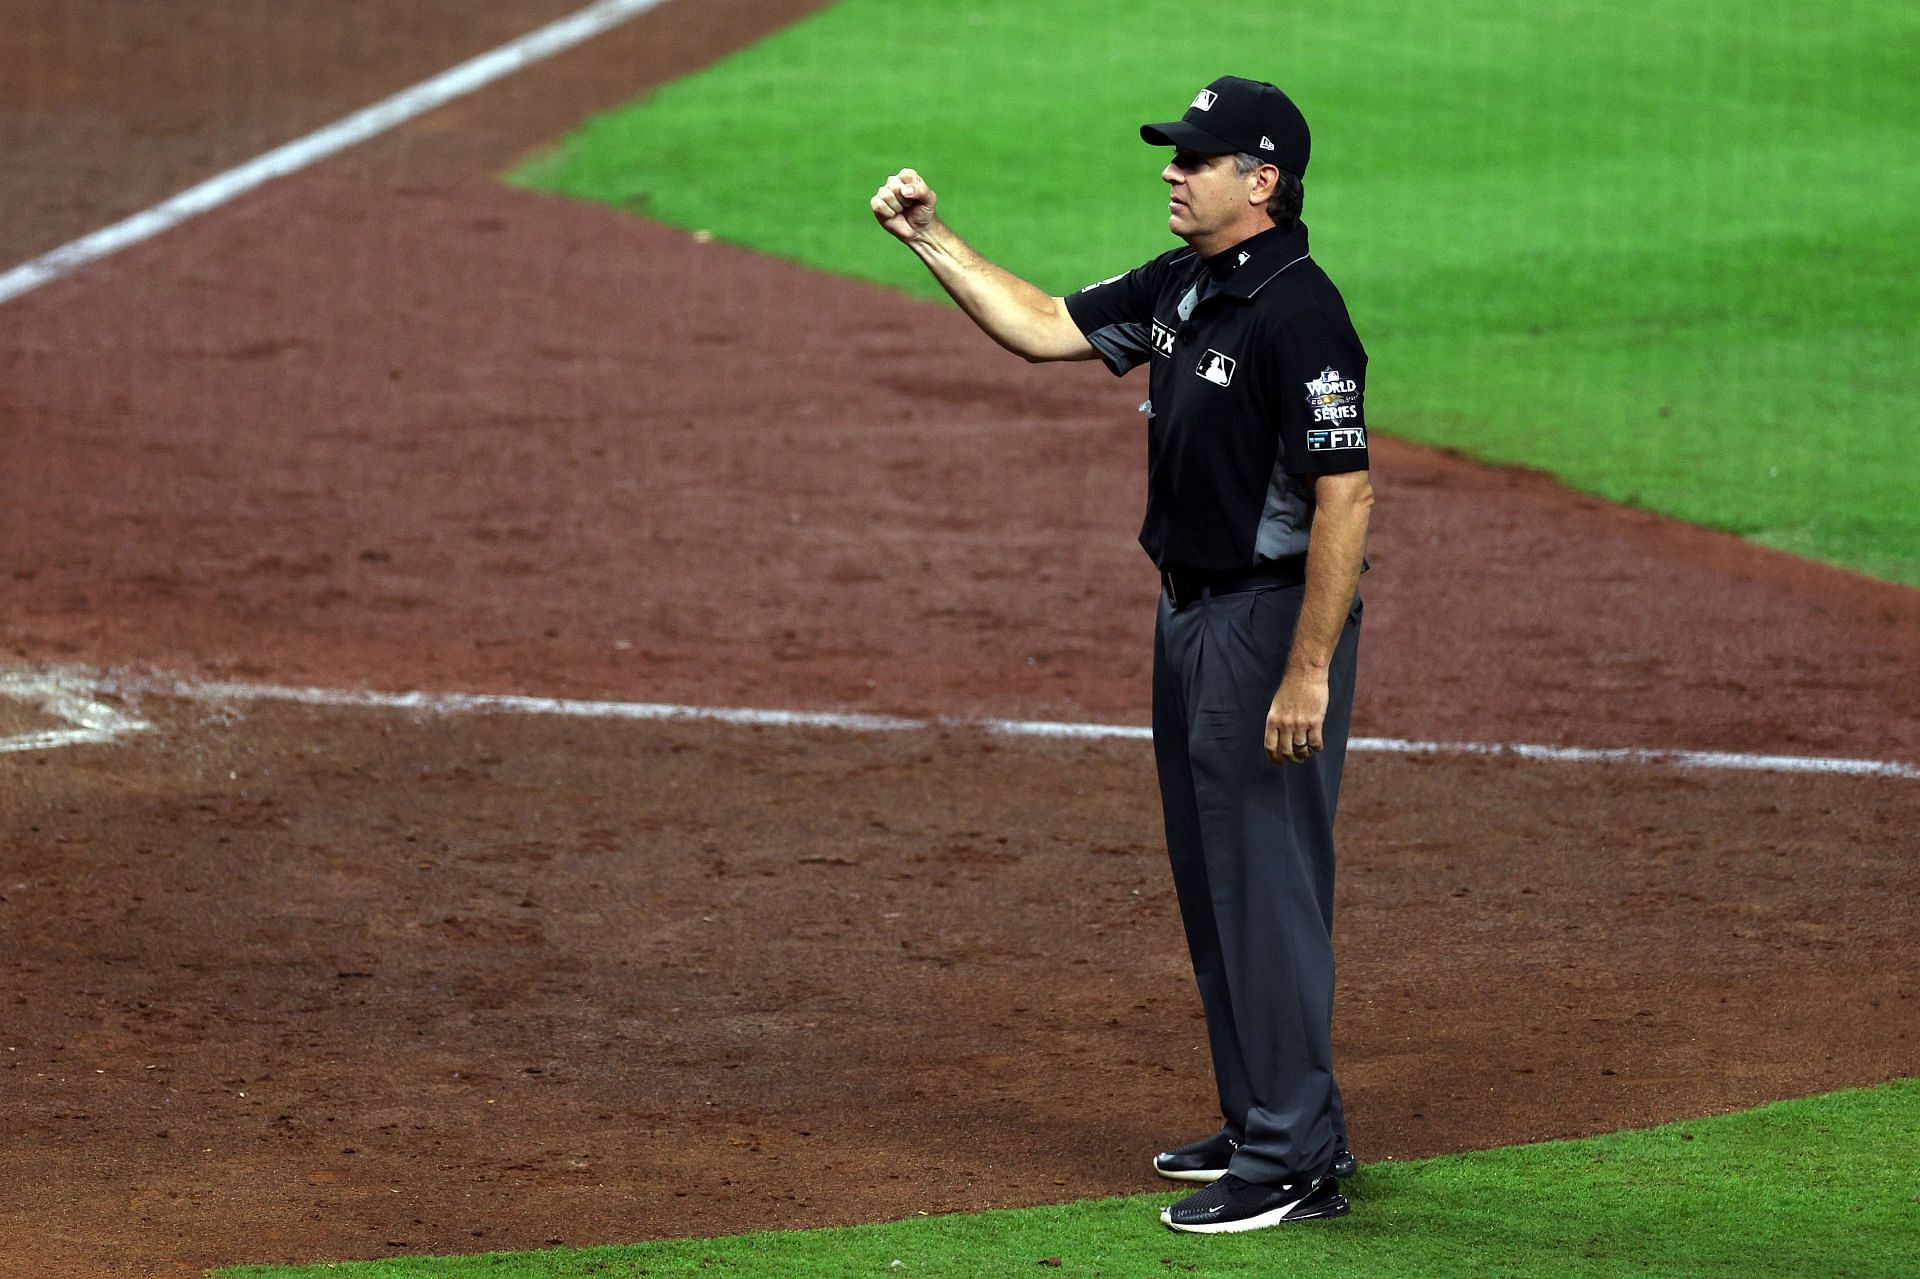 Umpire James Hoye confirms an out call in Game Two of the 2022 World Series at Minute Maid Park